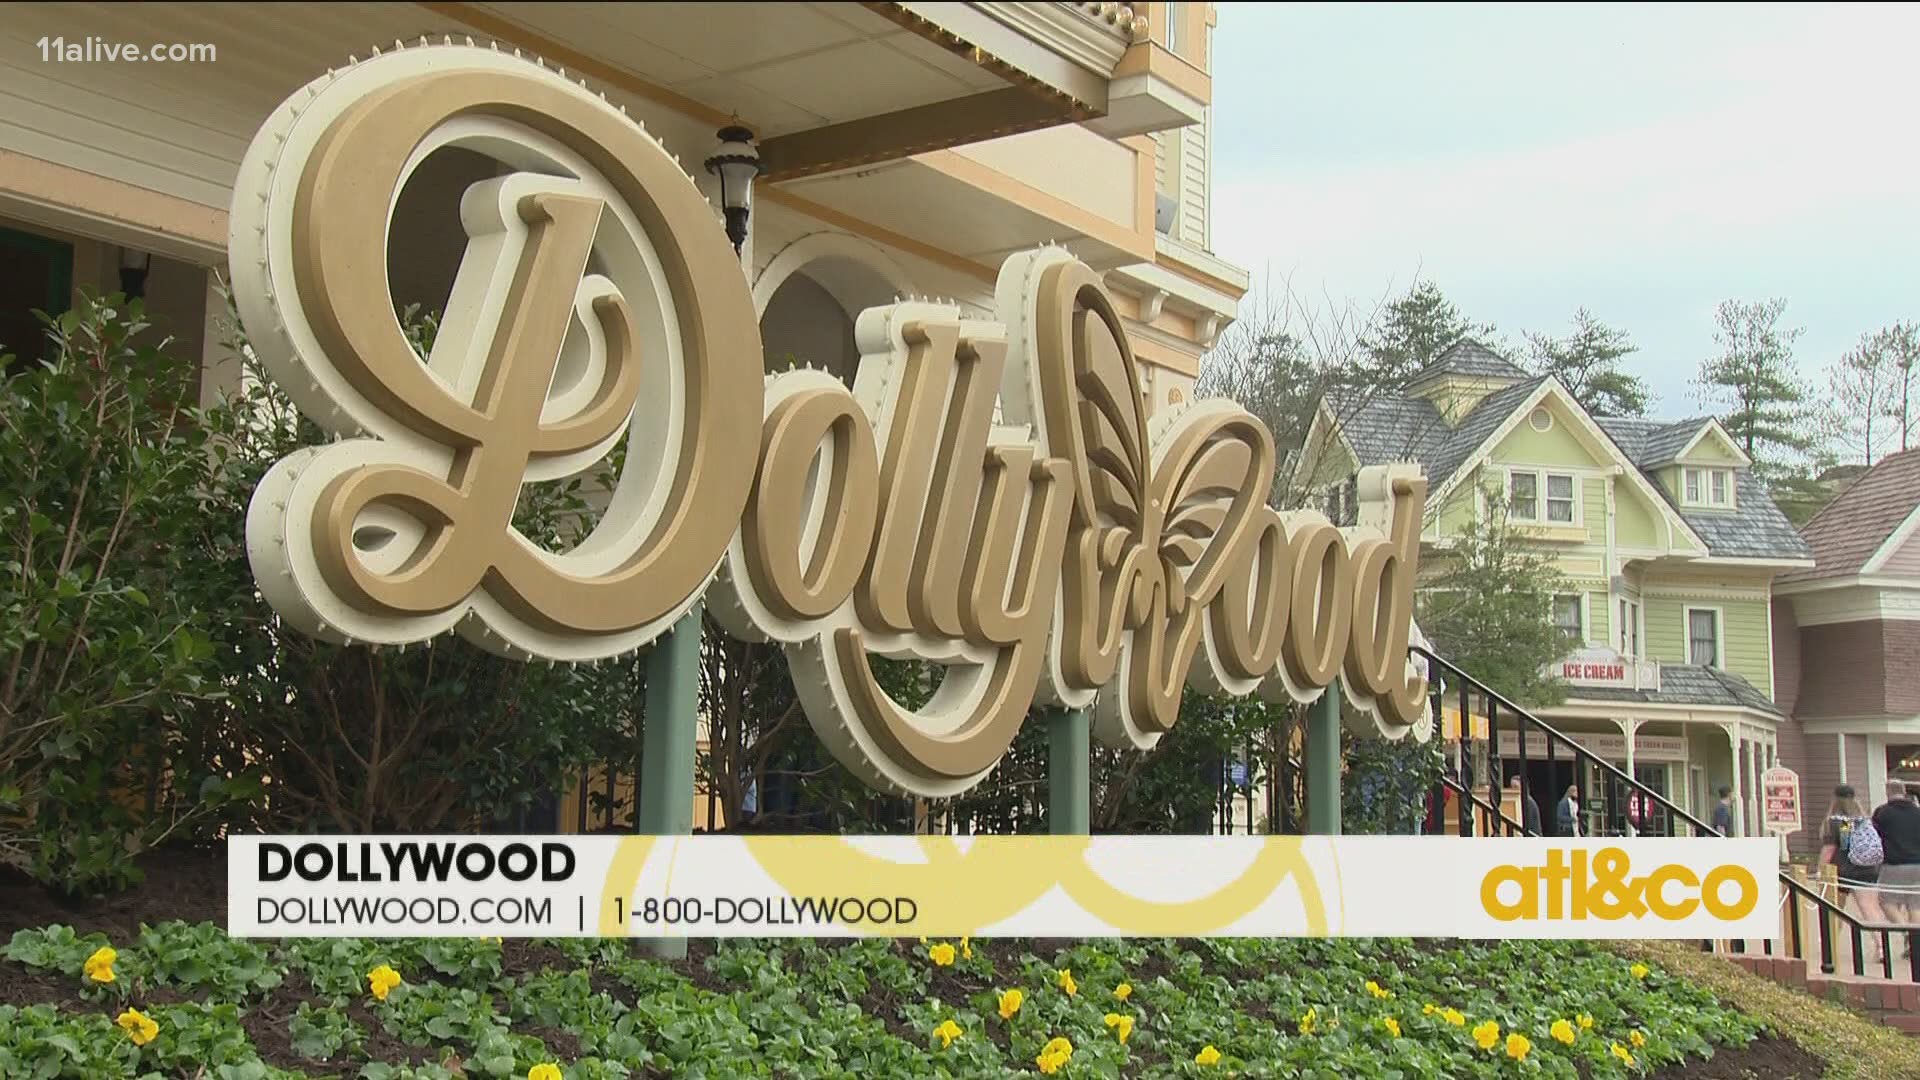 Take the whole family to Dollywood and enjoy world-class rides, top entertainment, and award-winning dining.